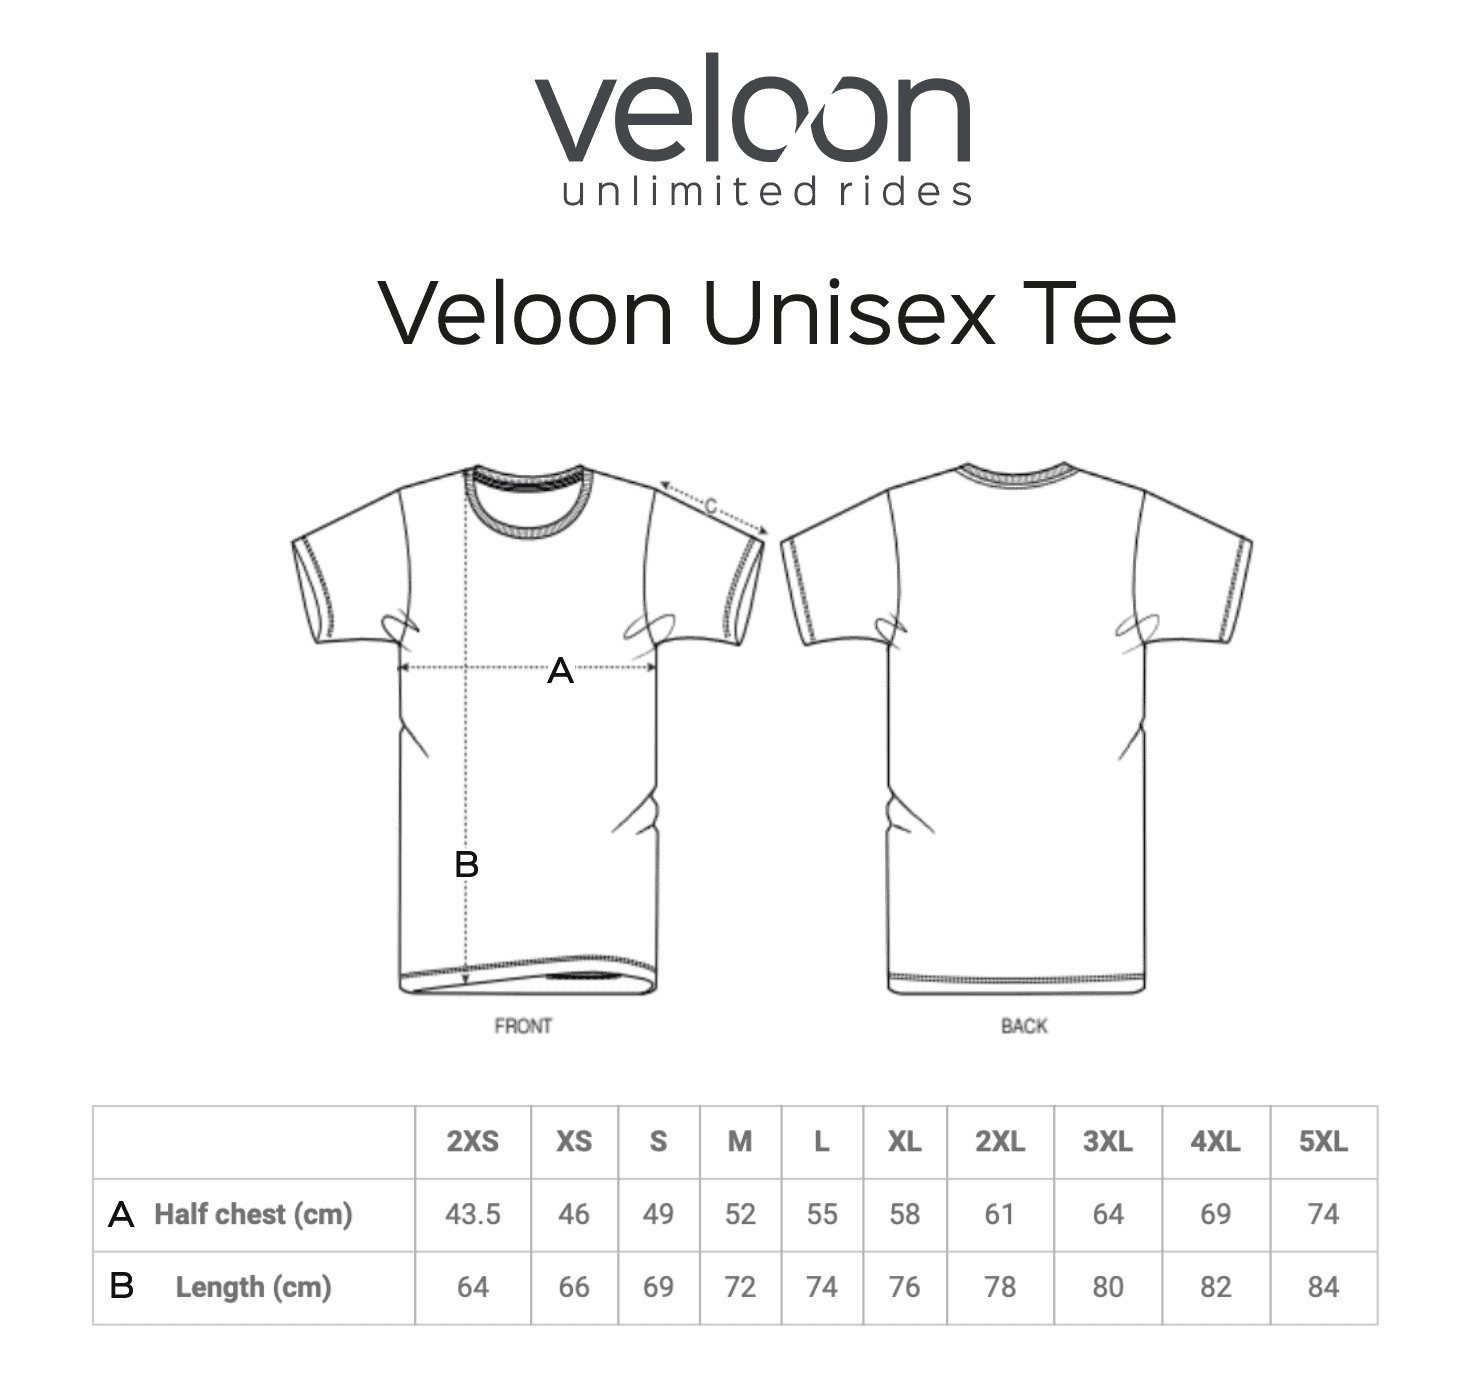 Unlimited T-Shirt Veloon Rides Pink